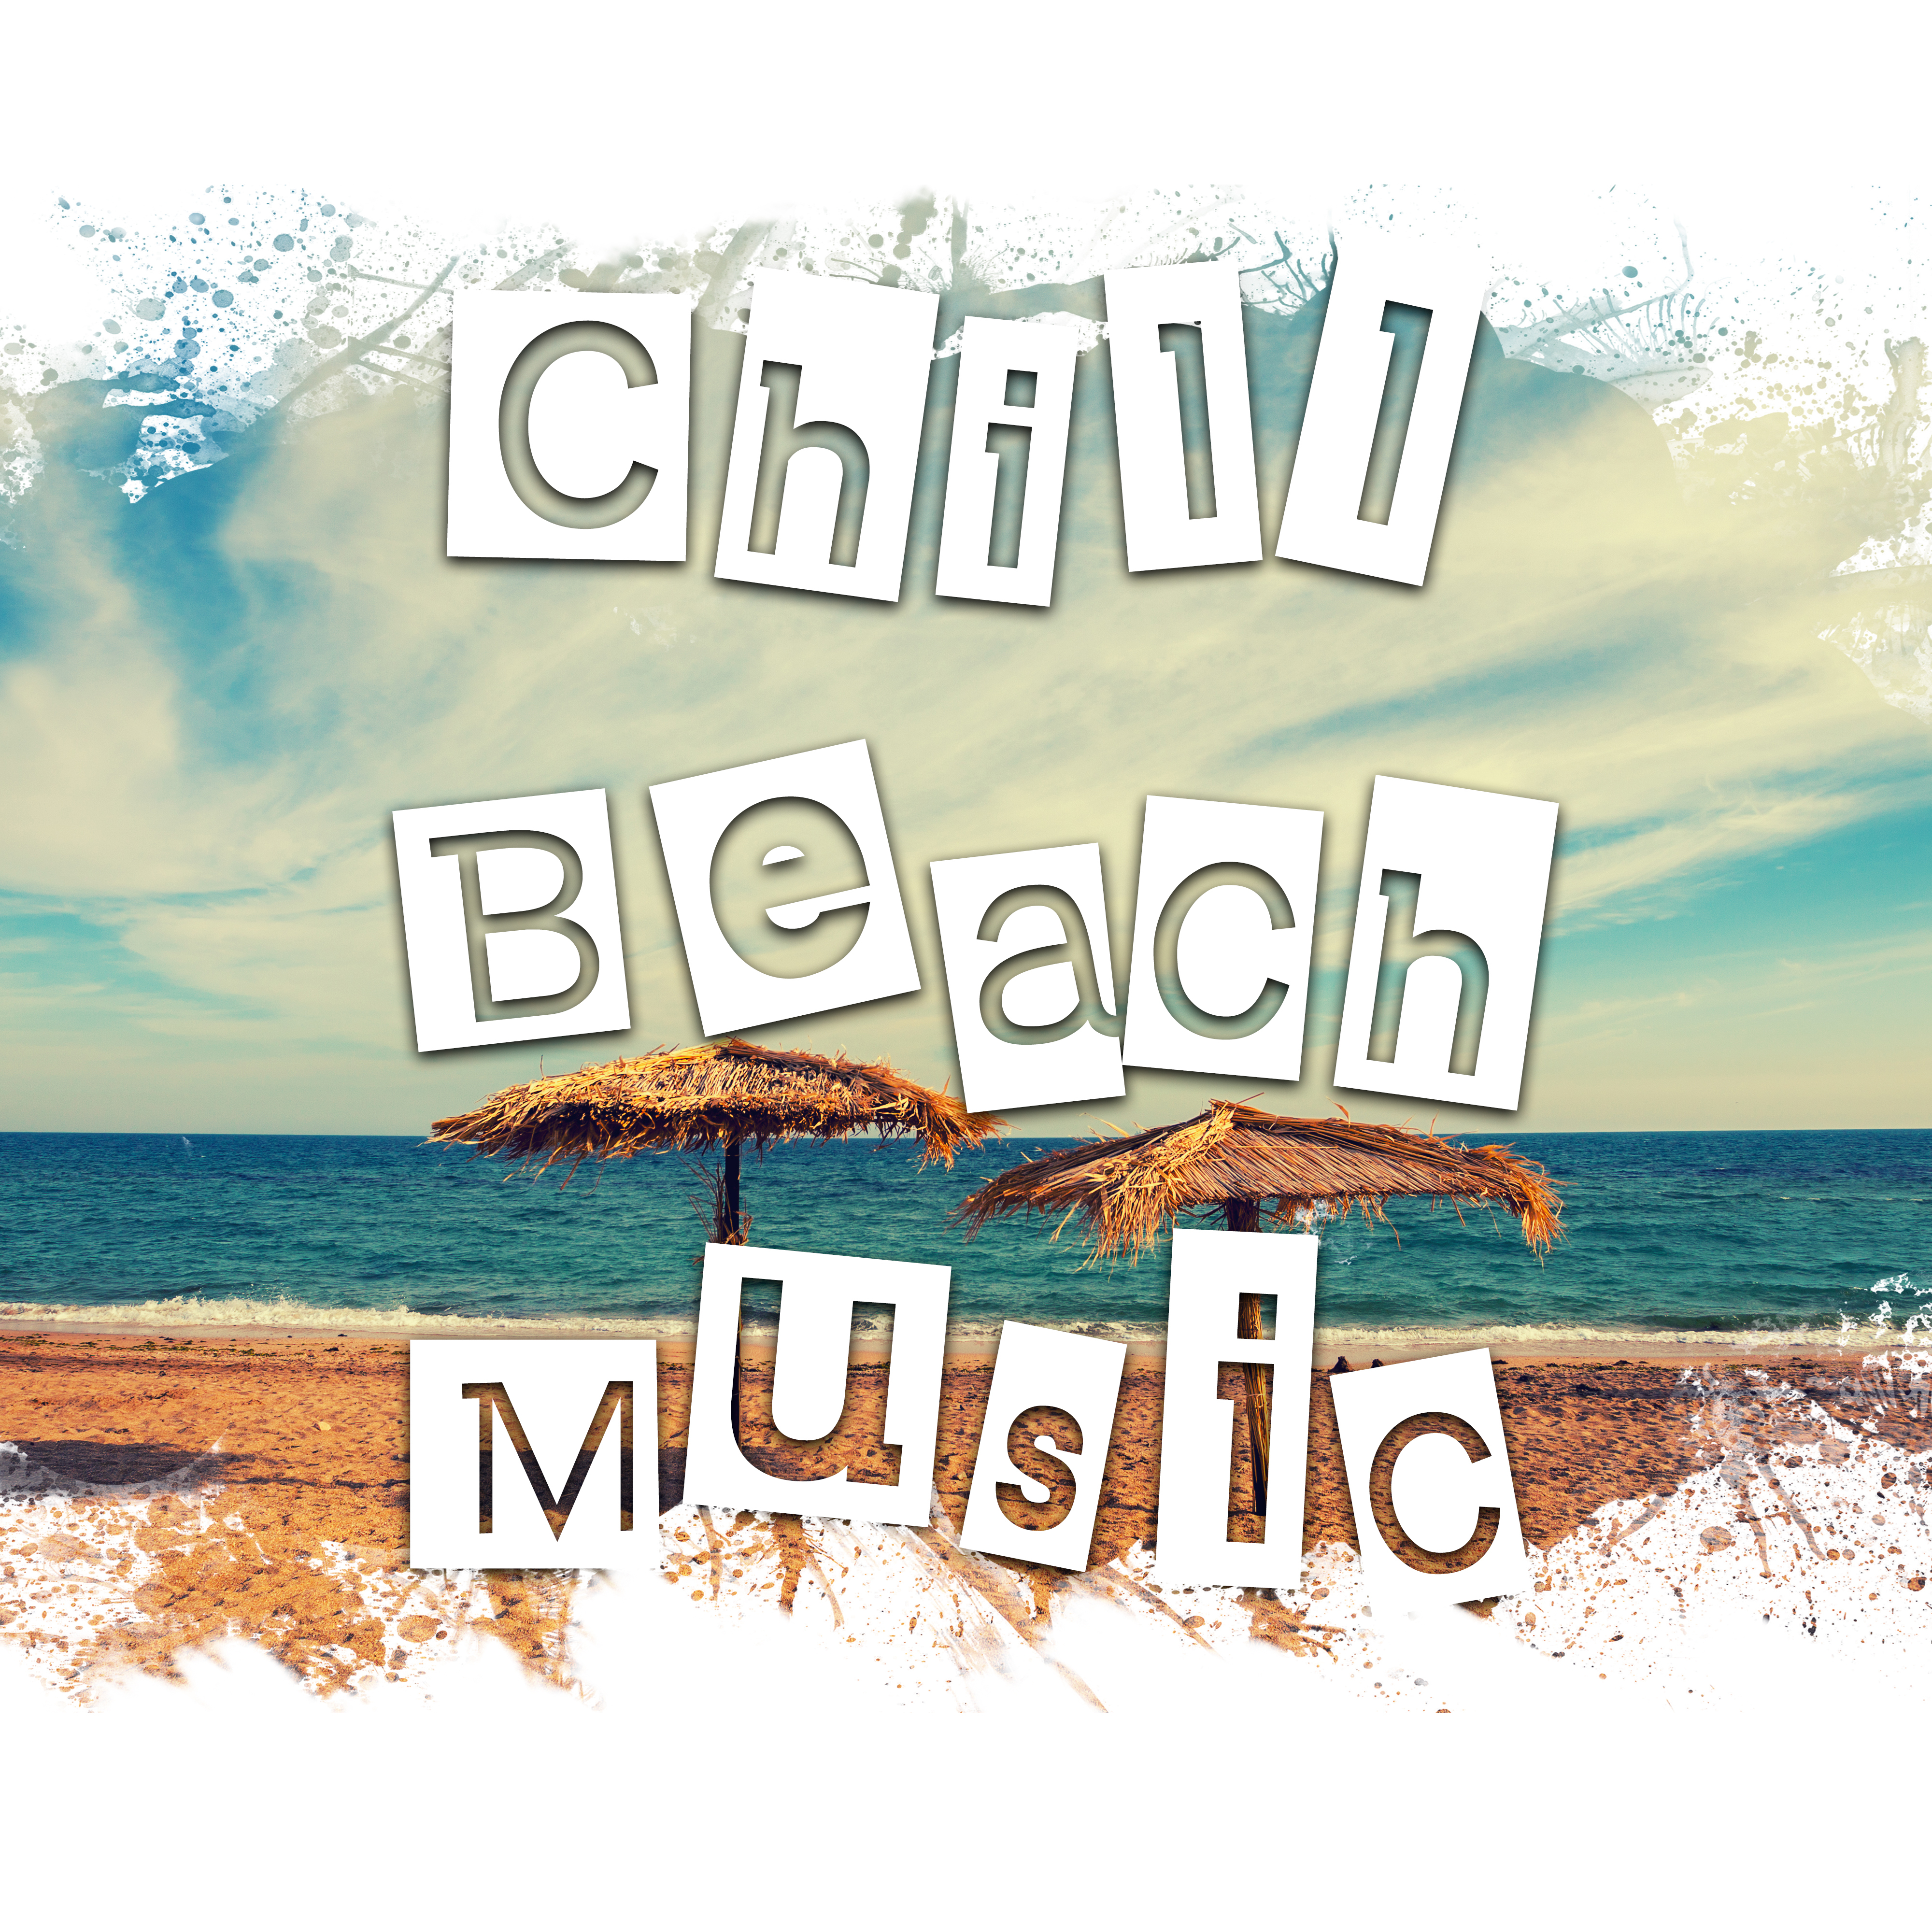 Chill Beach Music  Summer Beach Lounge, Rest a Bit, Soft Sounds to Relax, Chill Out Melodies